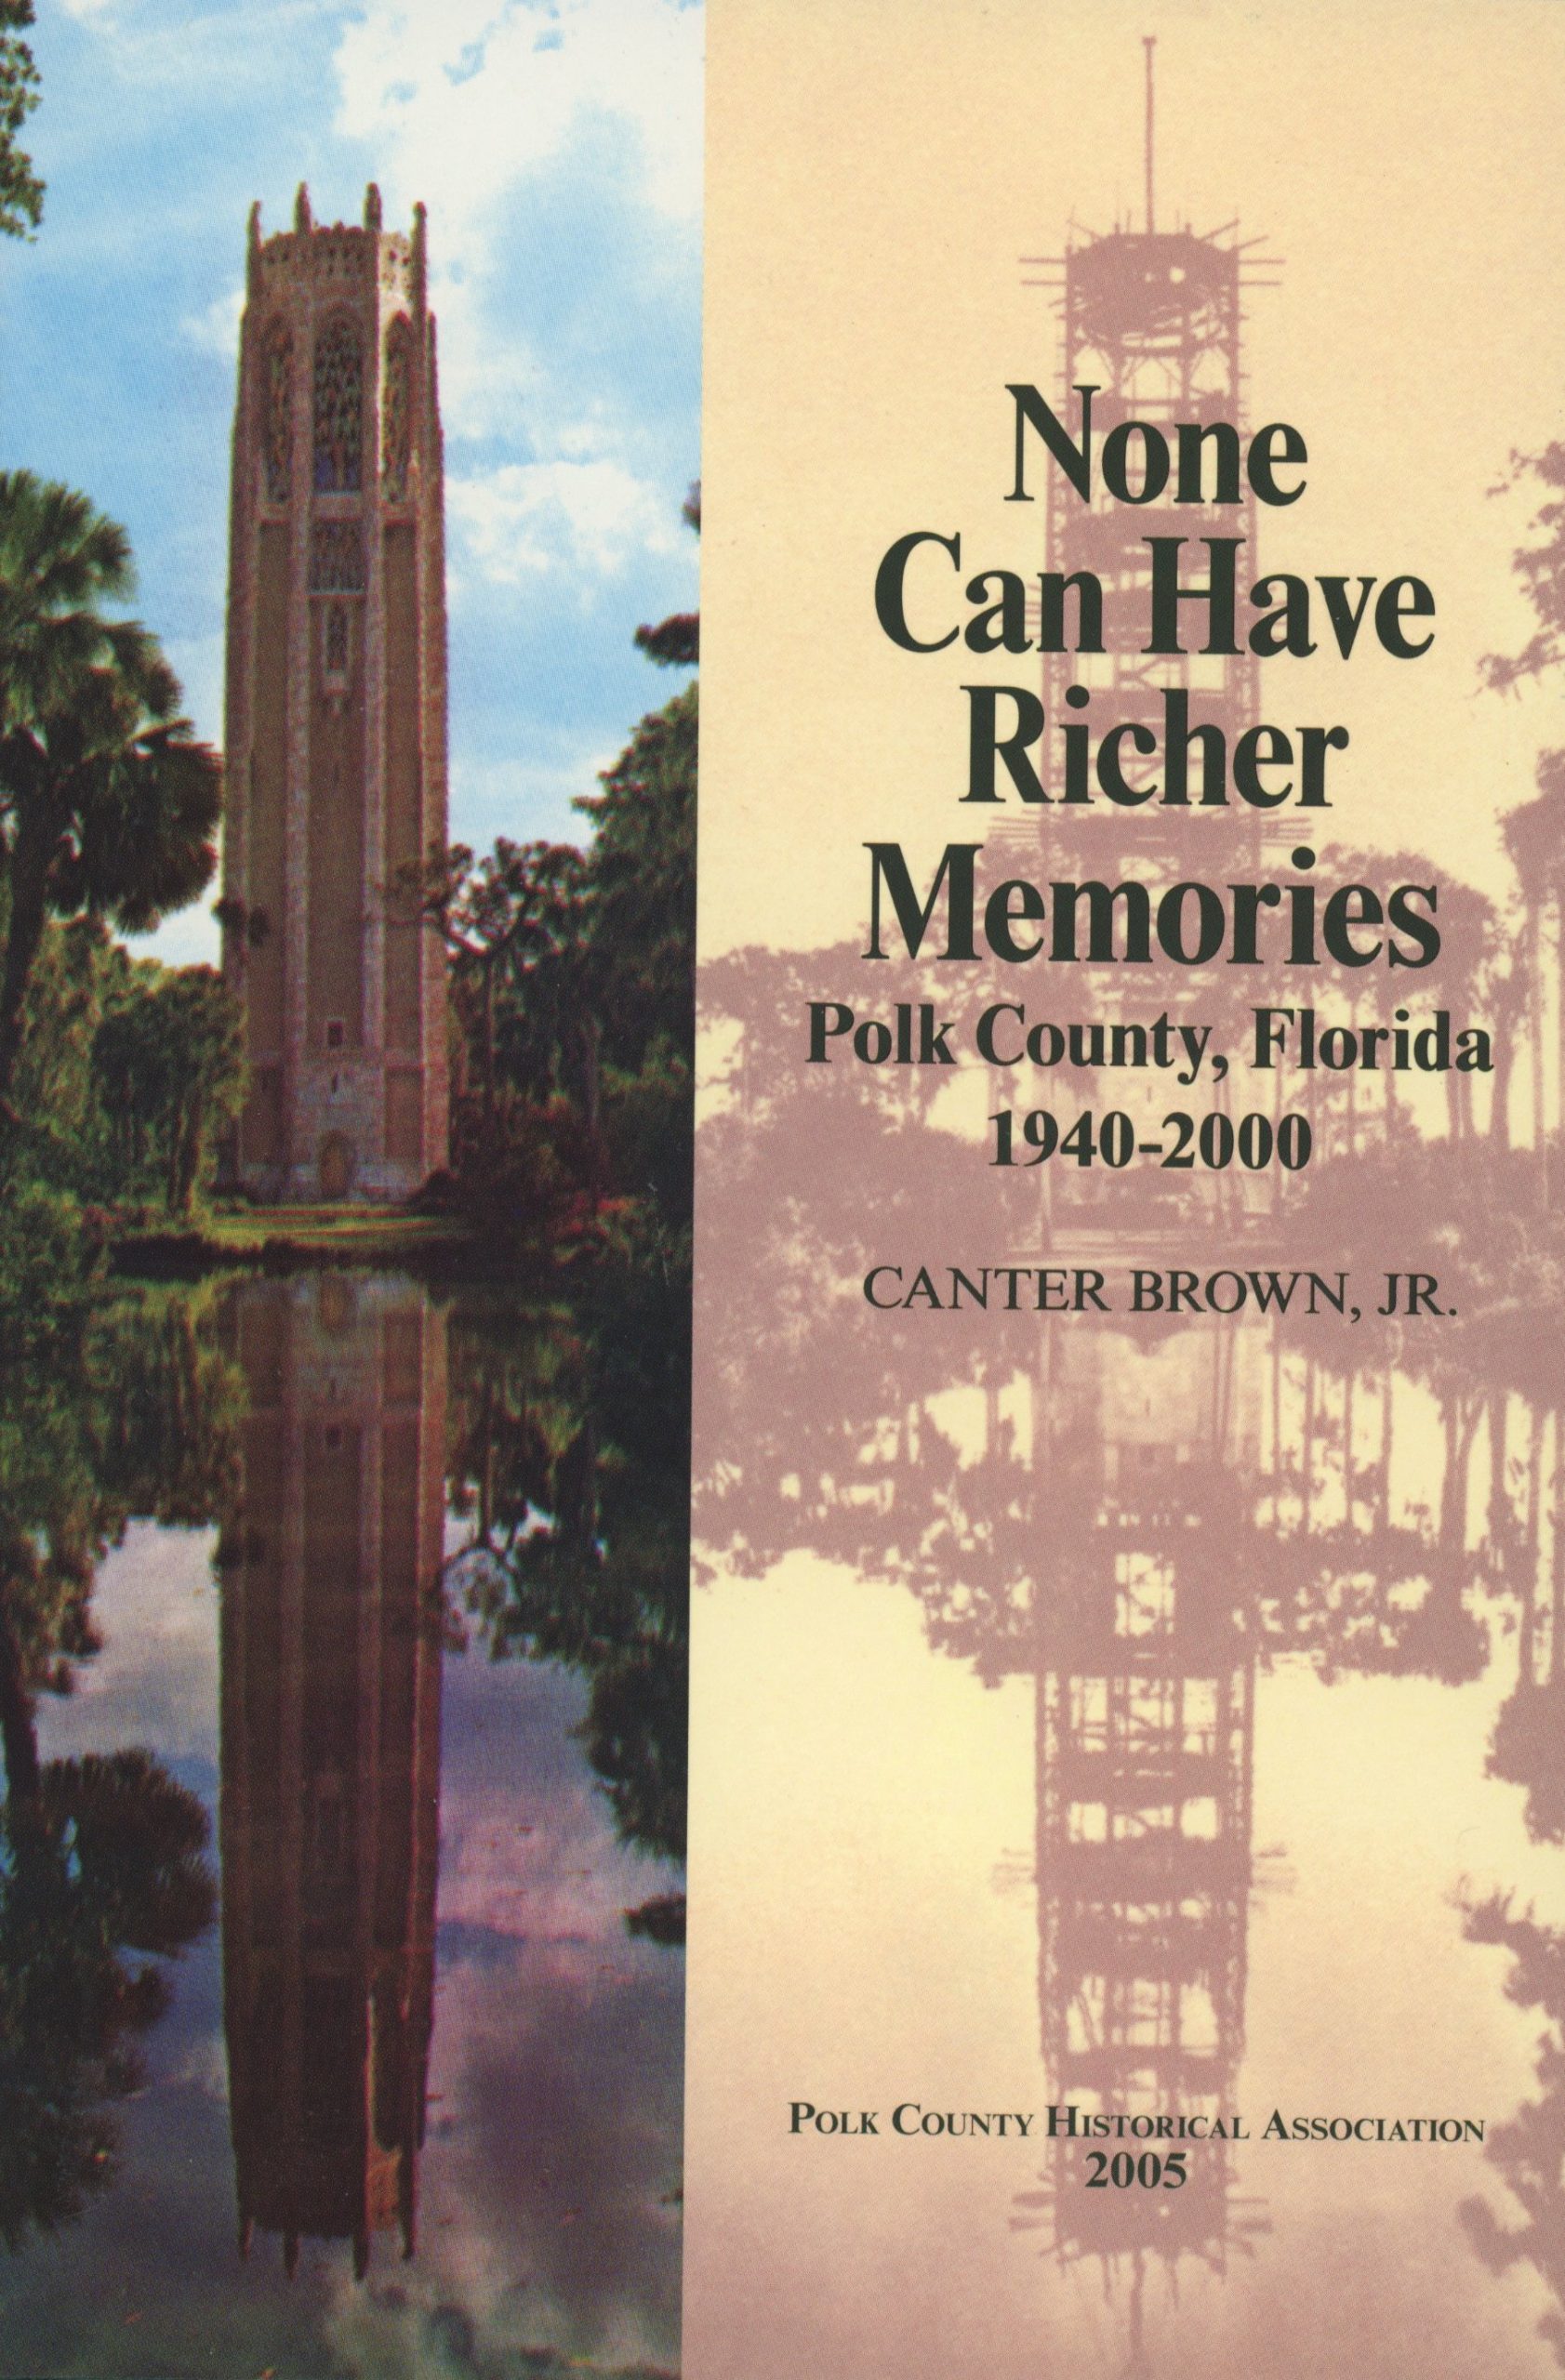 Image of the front cover of None Can Have Richer Memories